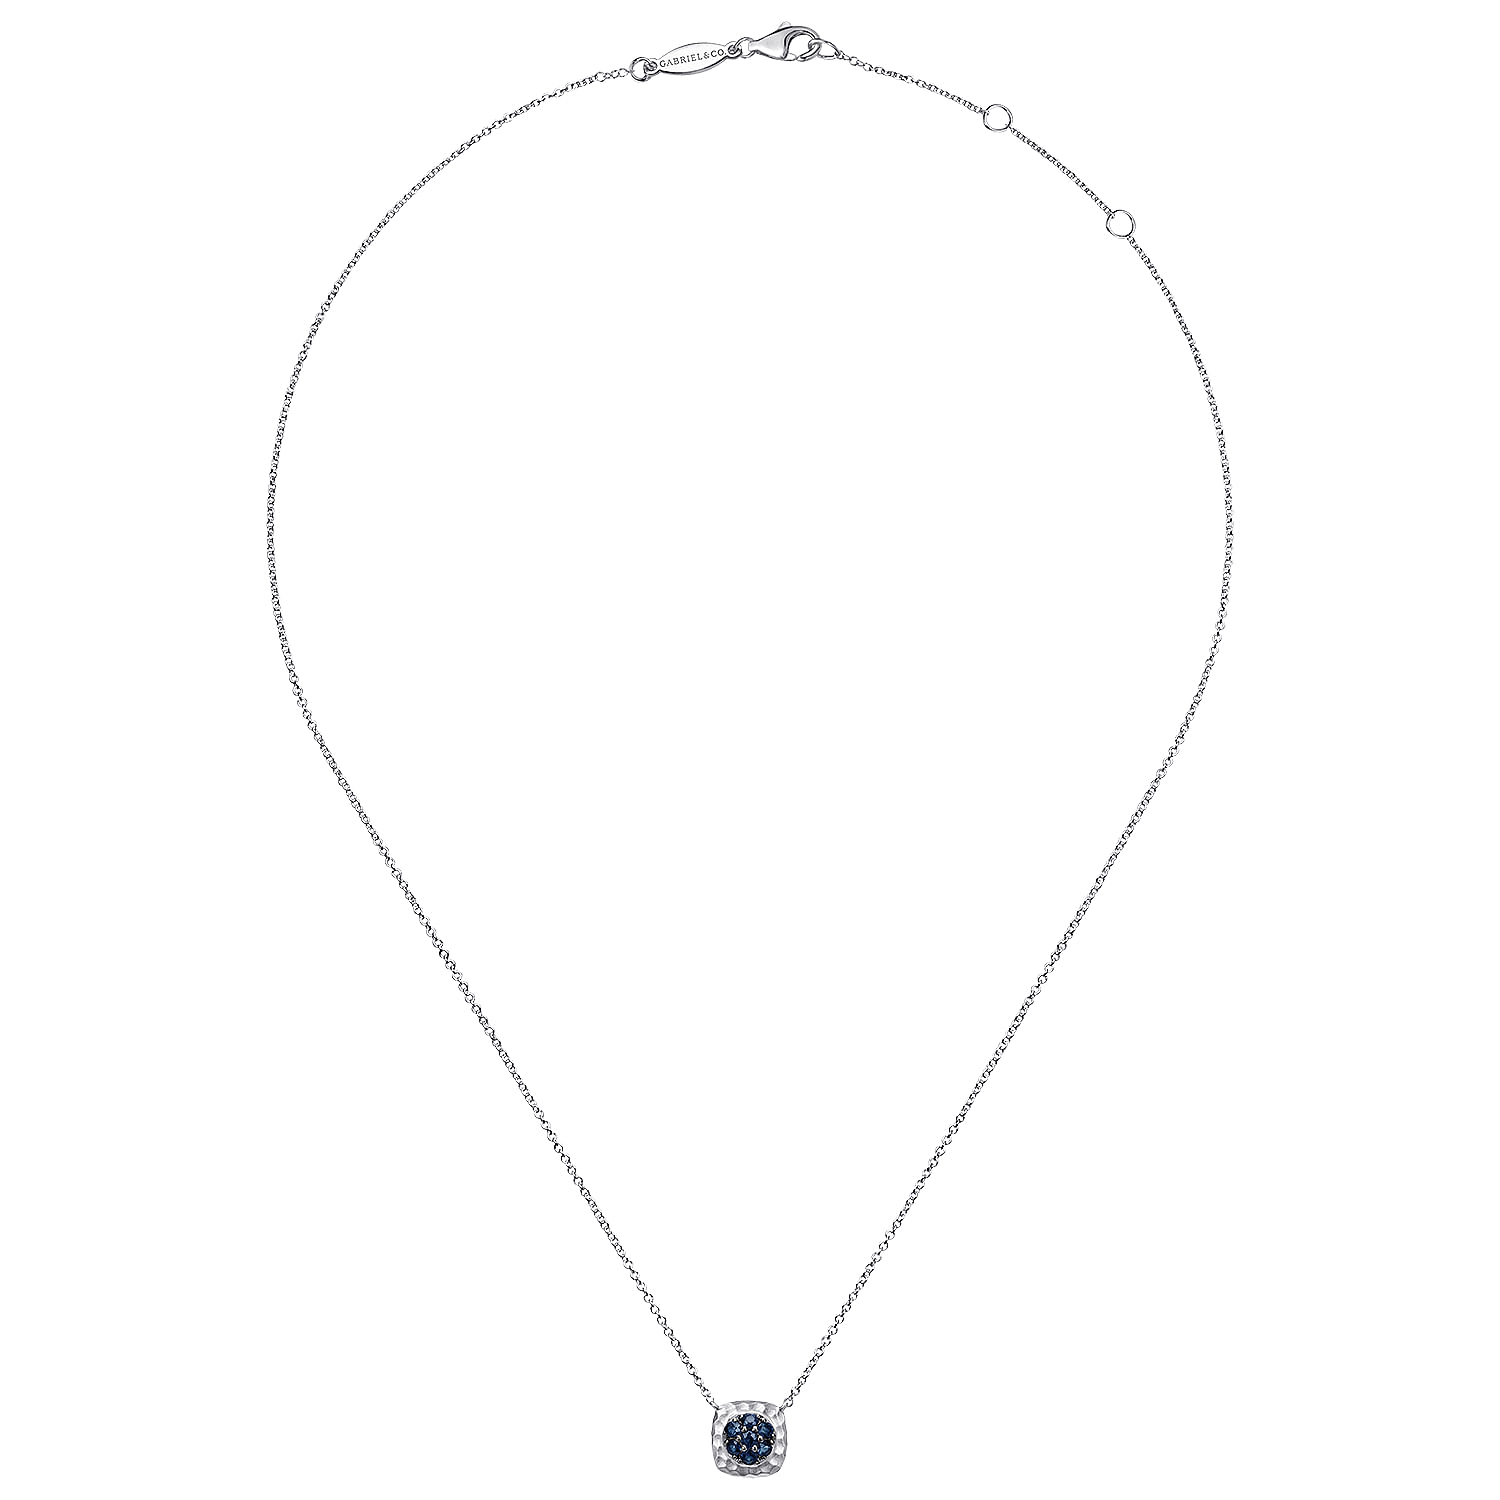 Hammered 925 Sterling Silver Sapphire Pavé Pendant Necklace